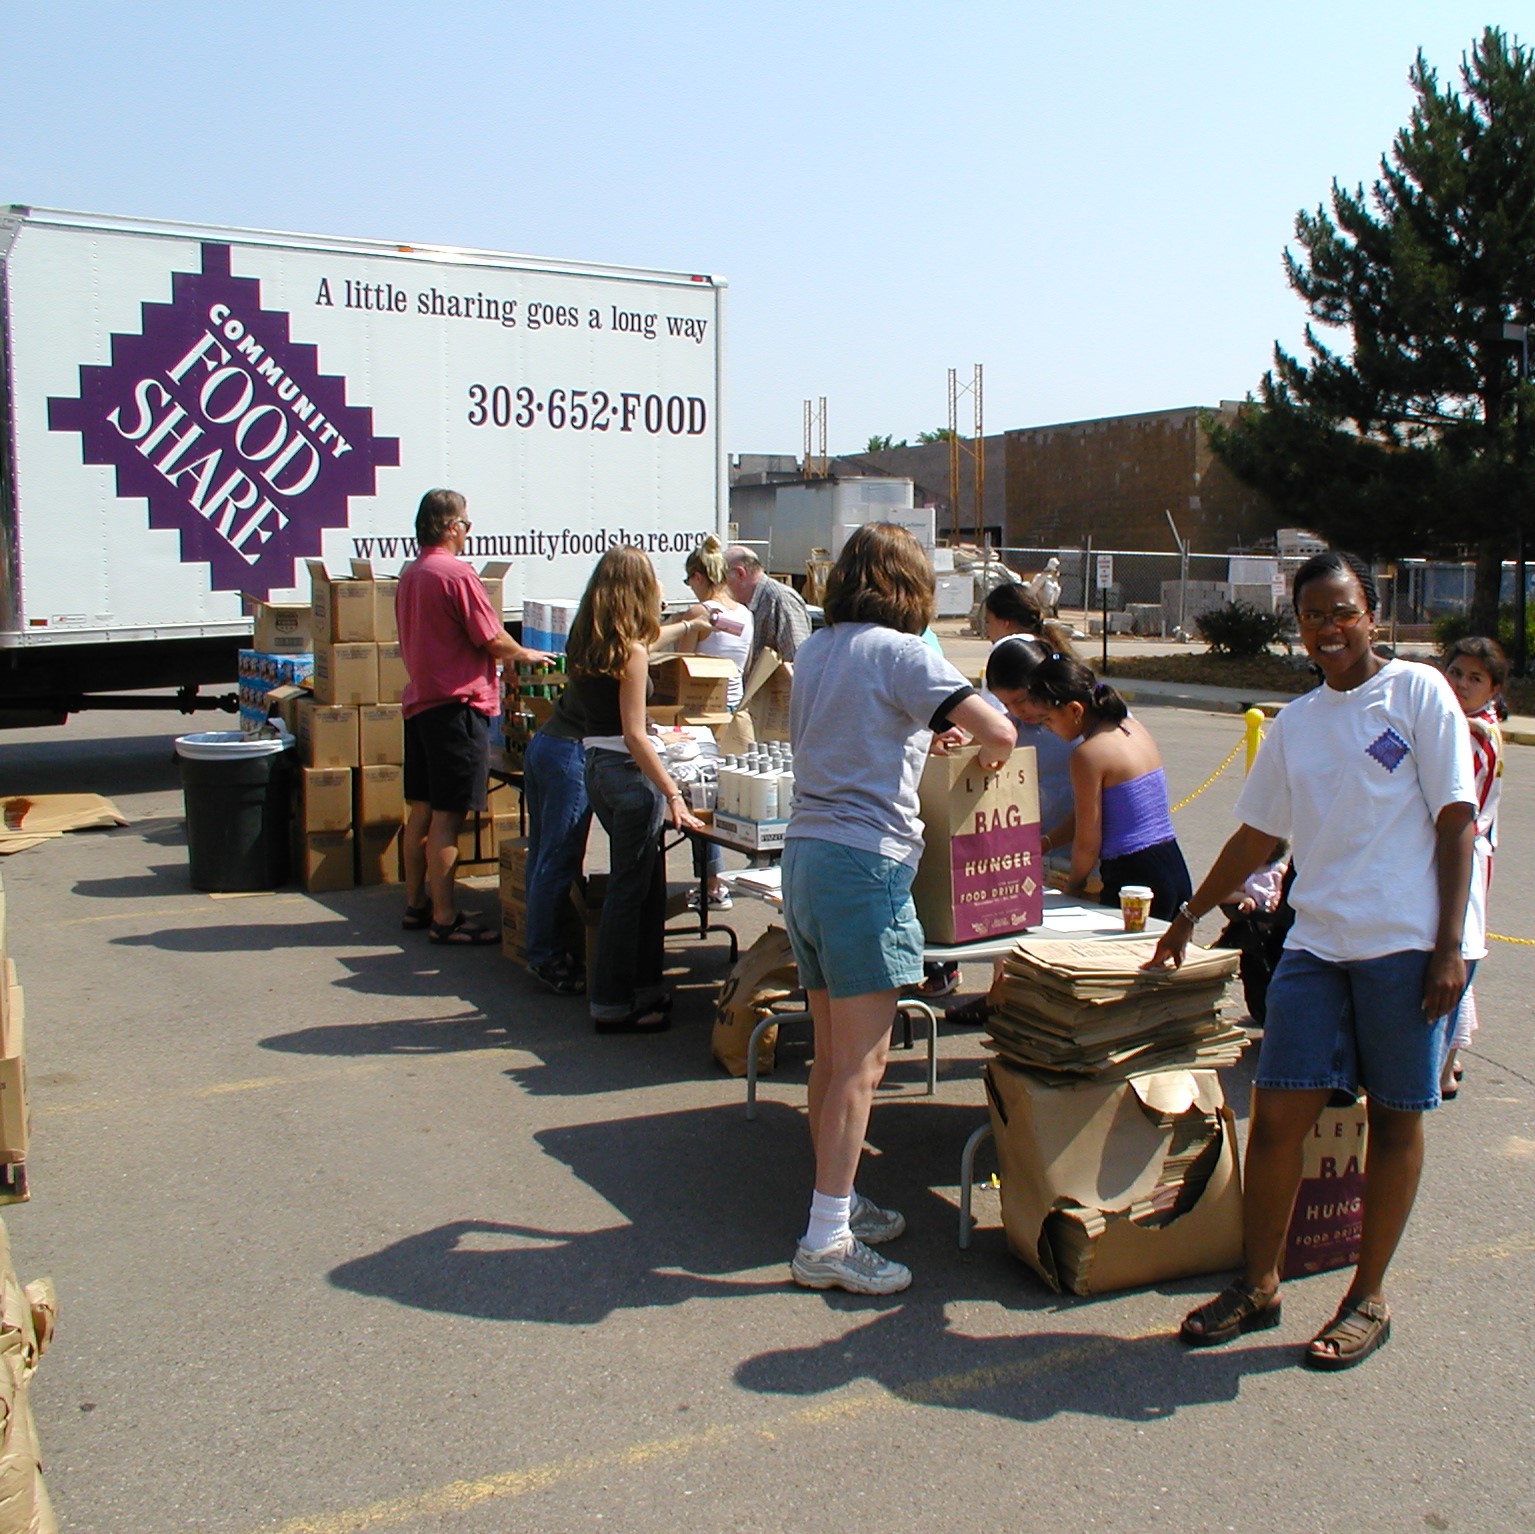 Volunteers set up a mobile pantry in the early 2000s